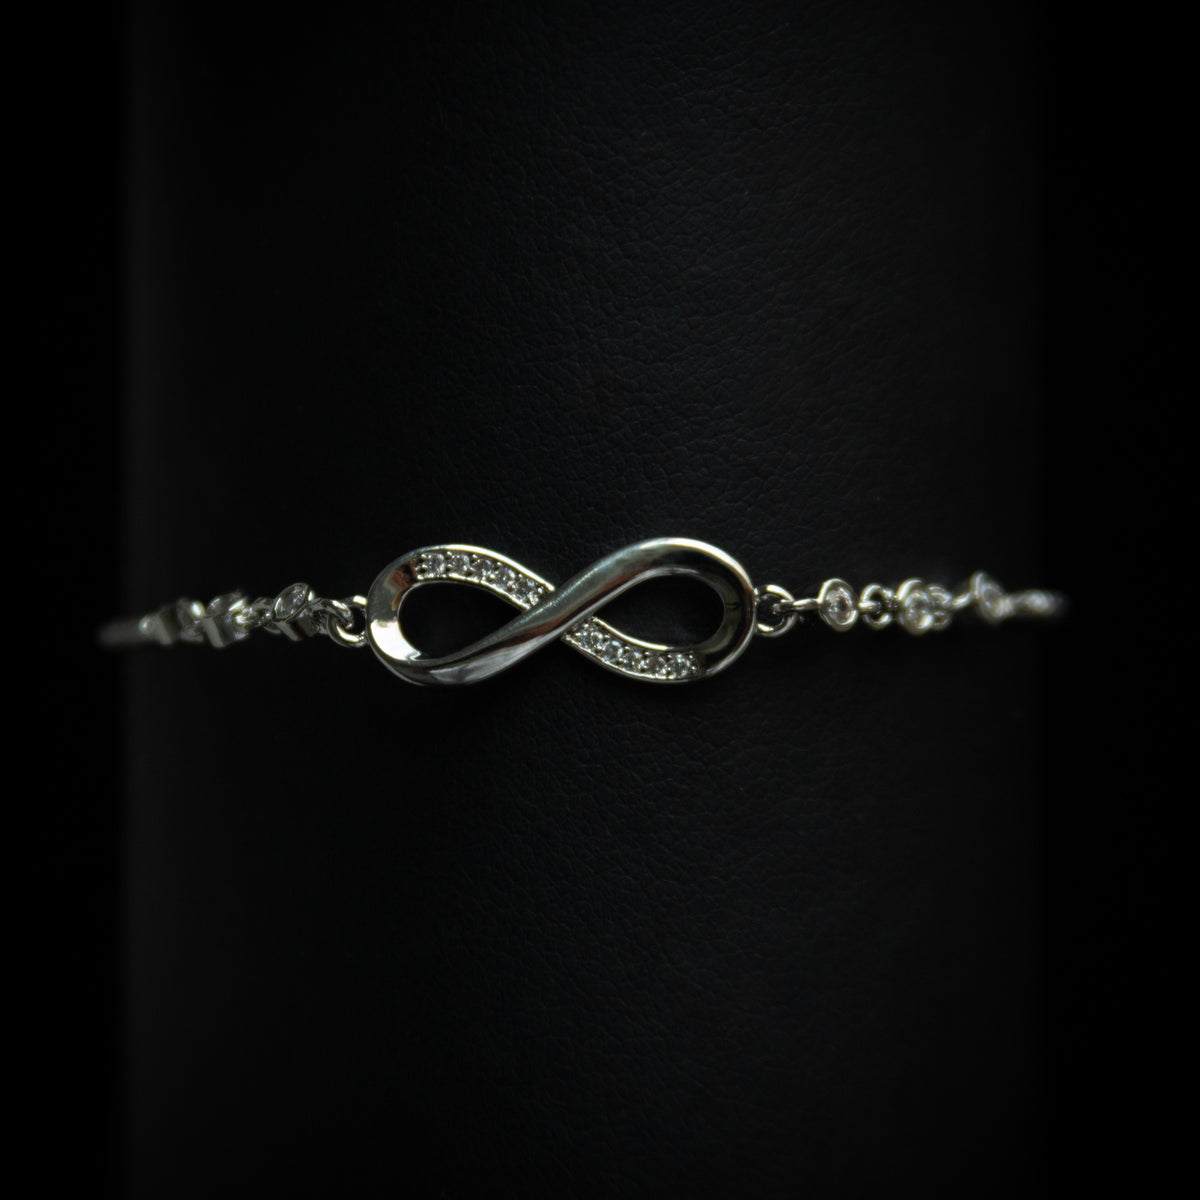 Infinity Bracelet With Clear Crystal Stones